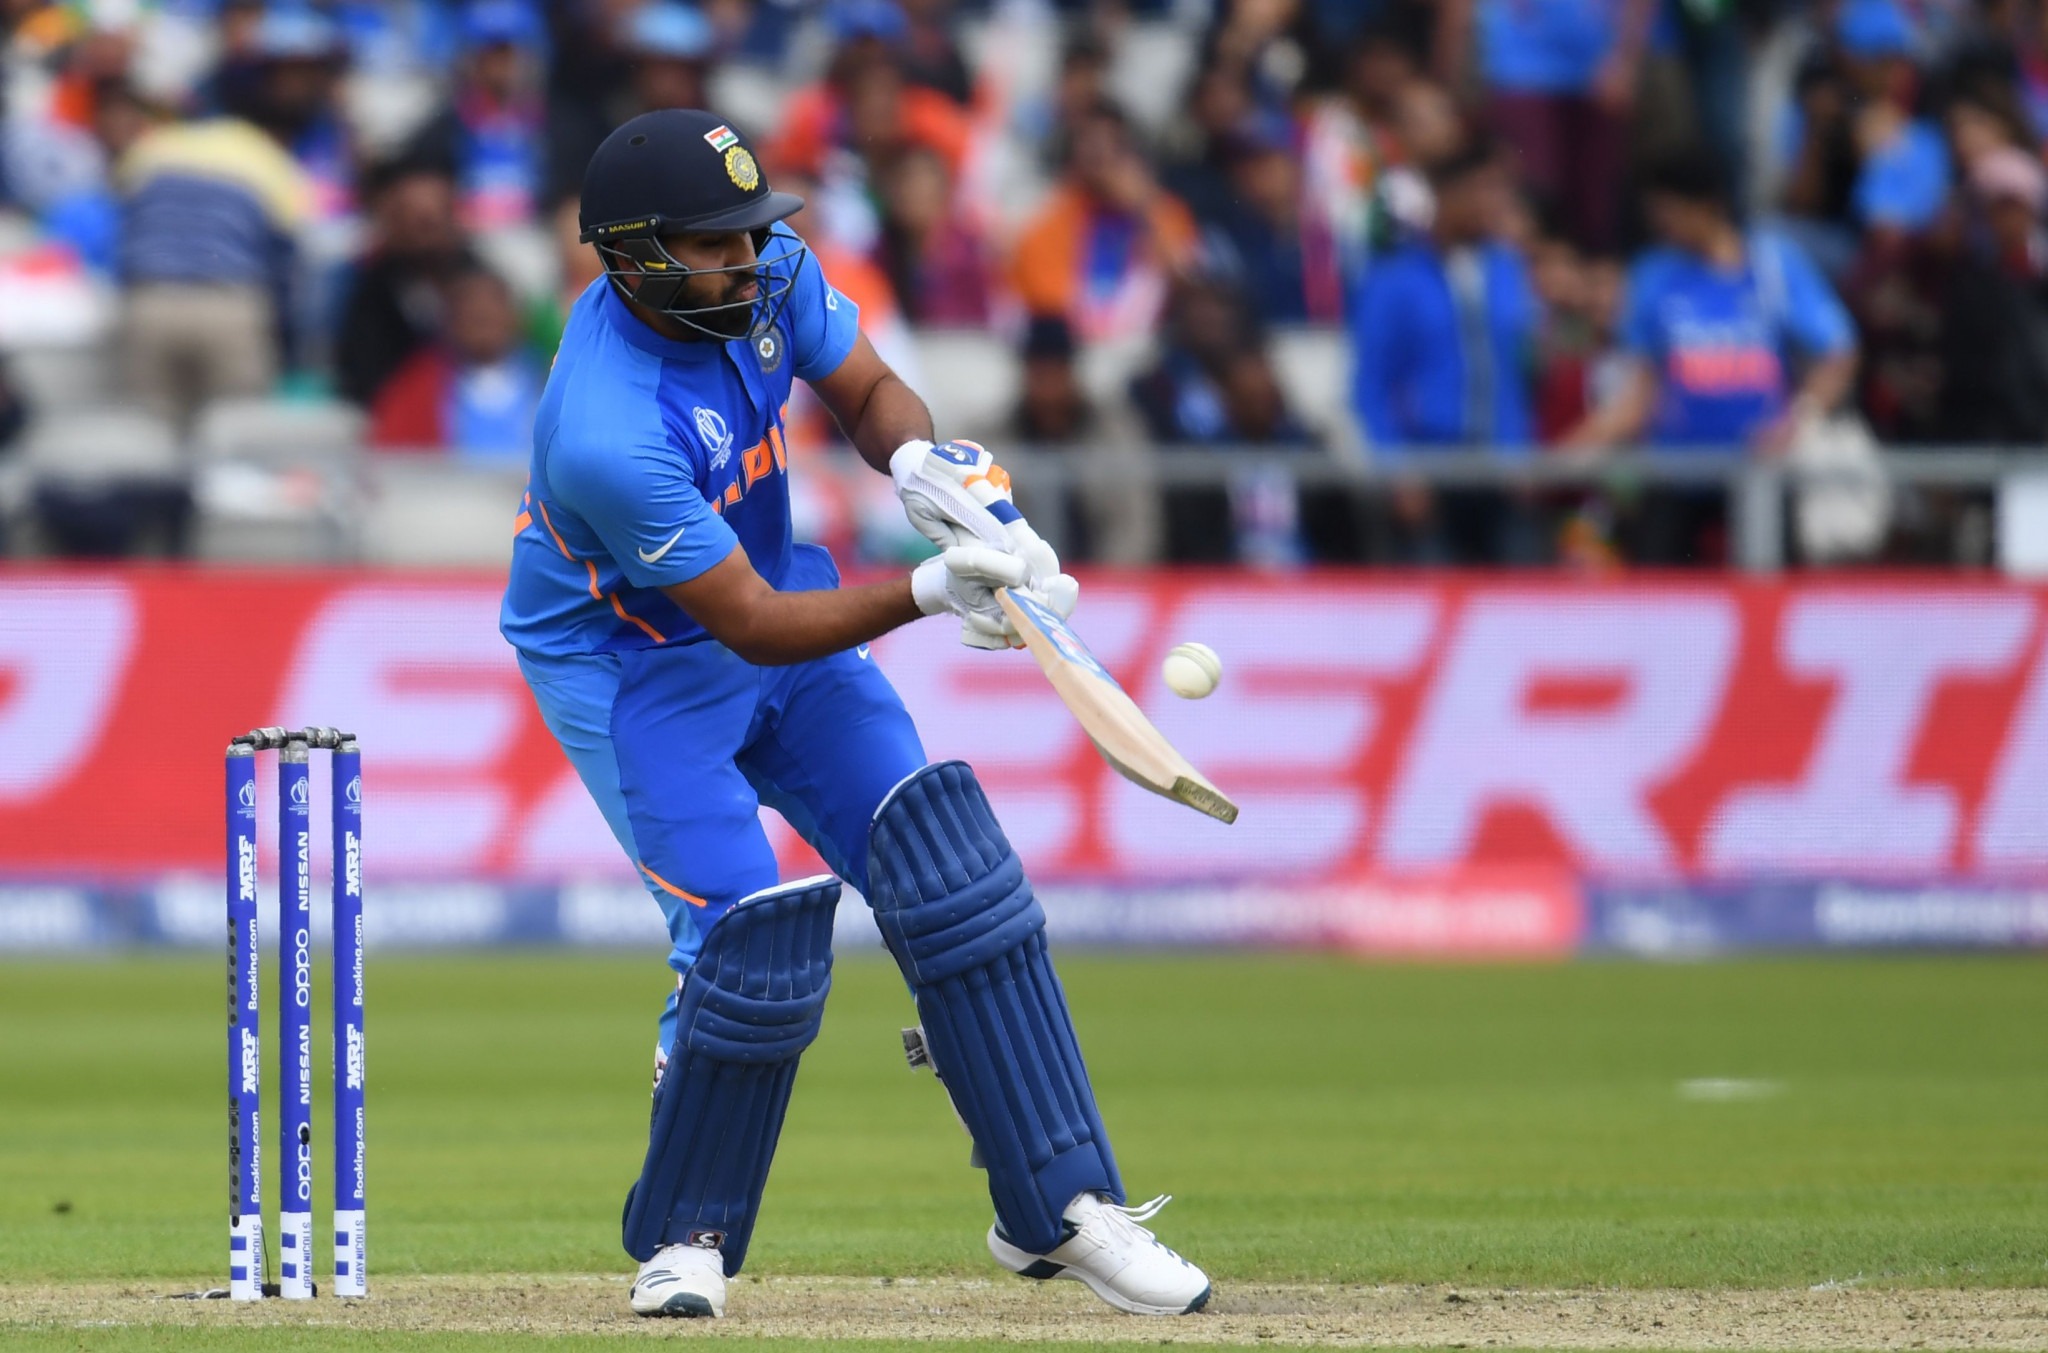 Rohit Sharma hit 140 as India beat Pakistan at the Cricket World Cup ©Getty Images